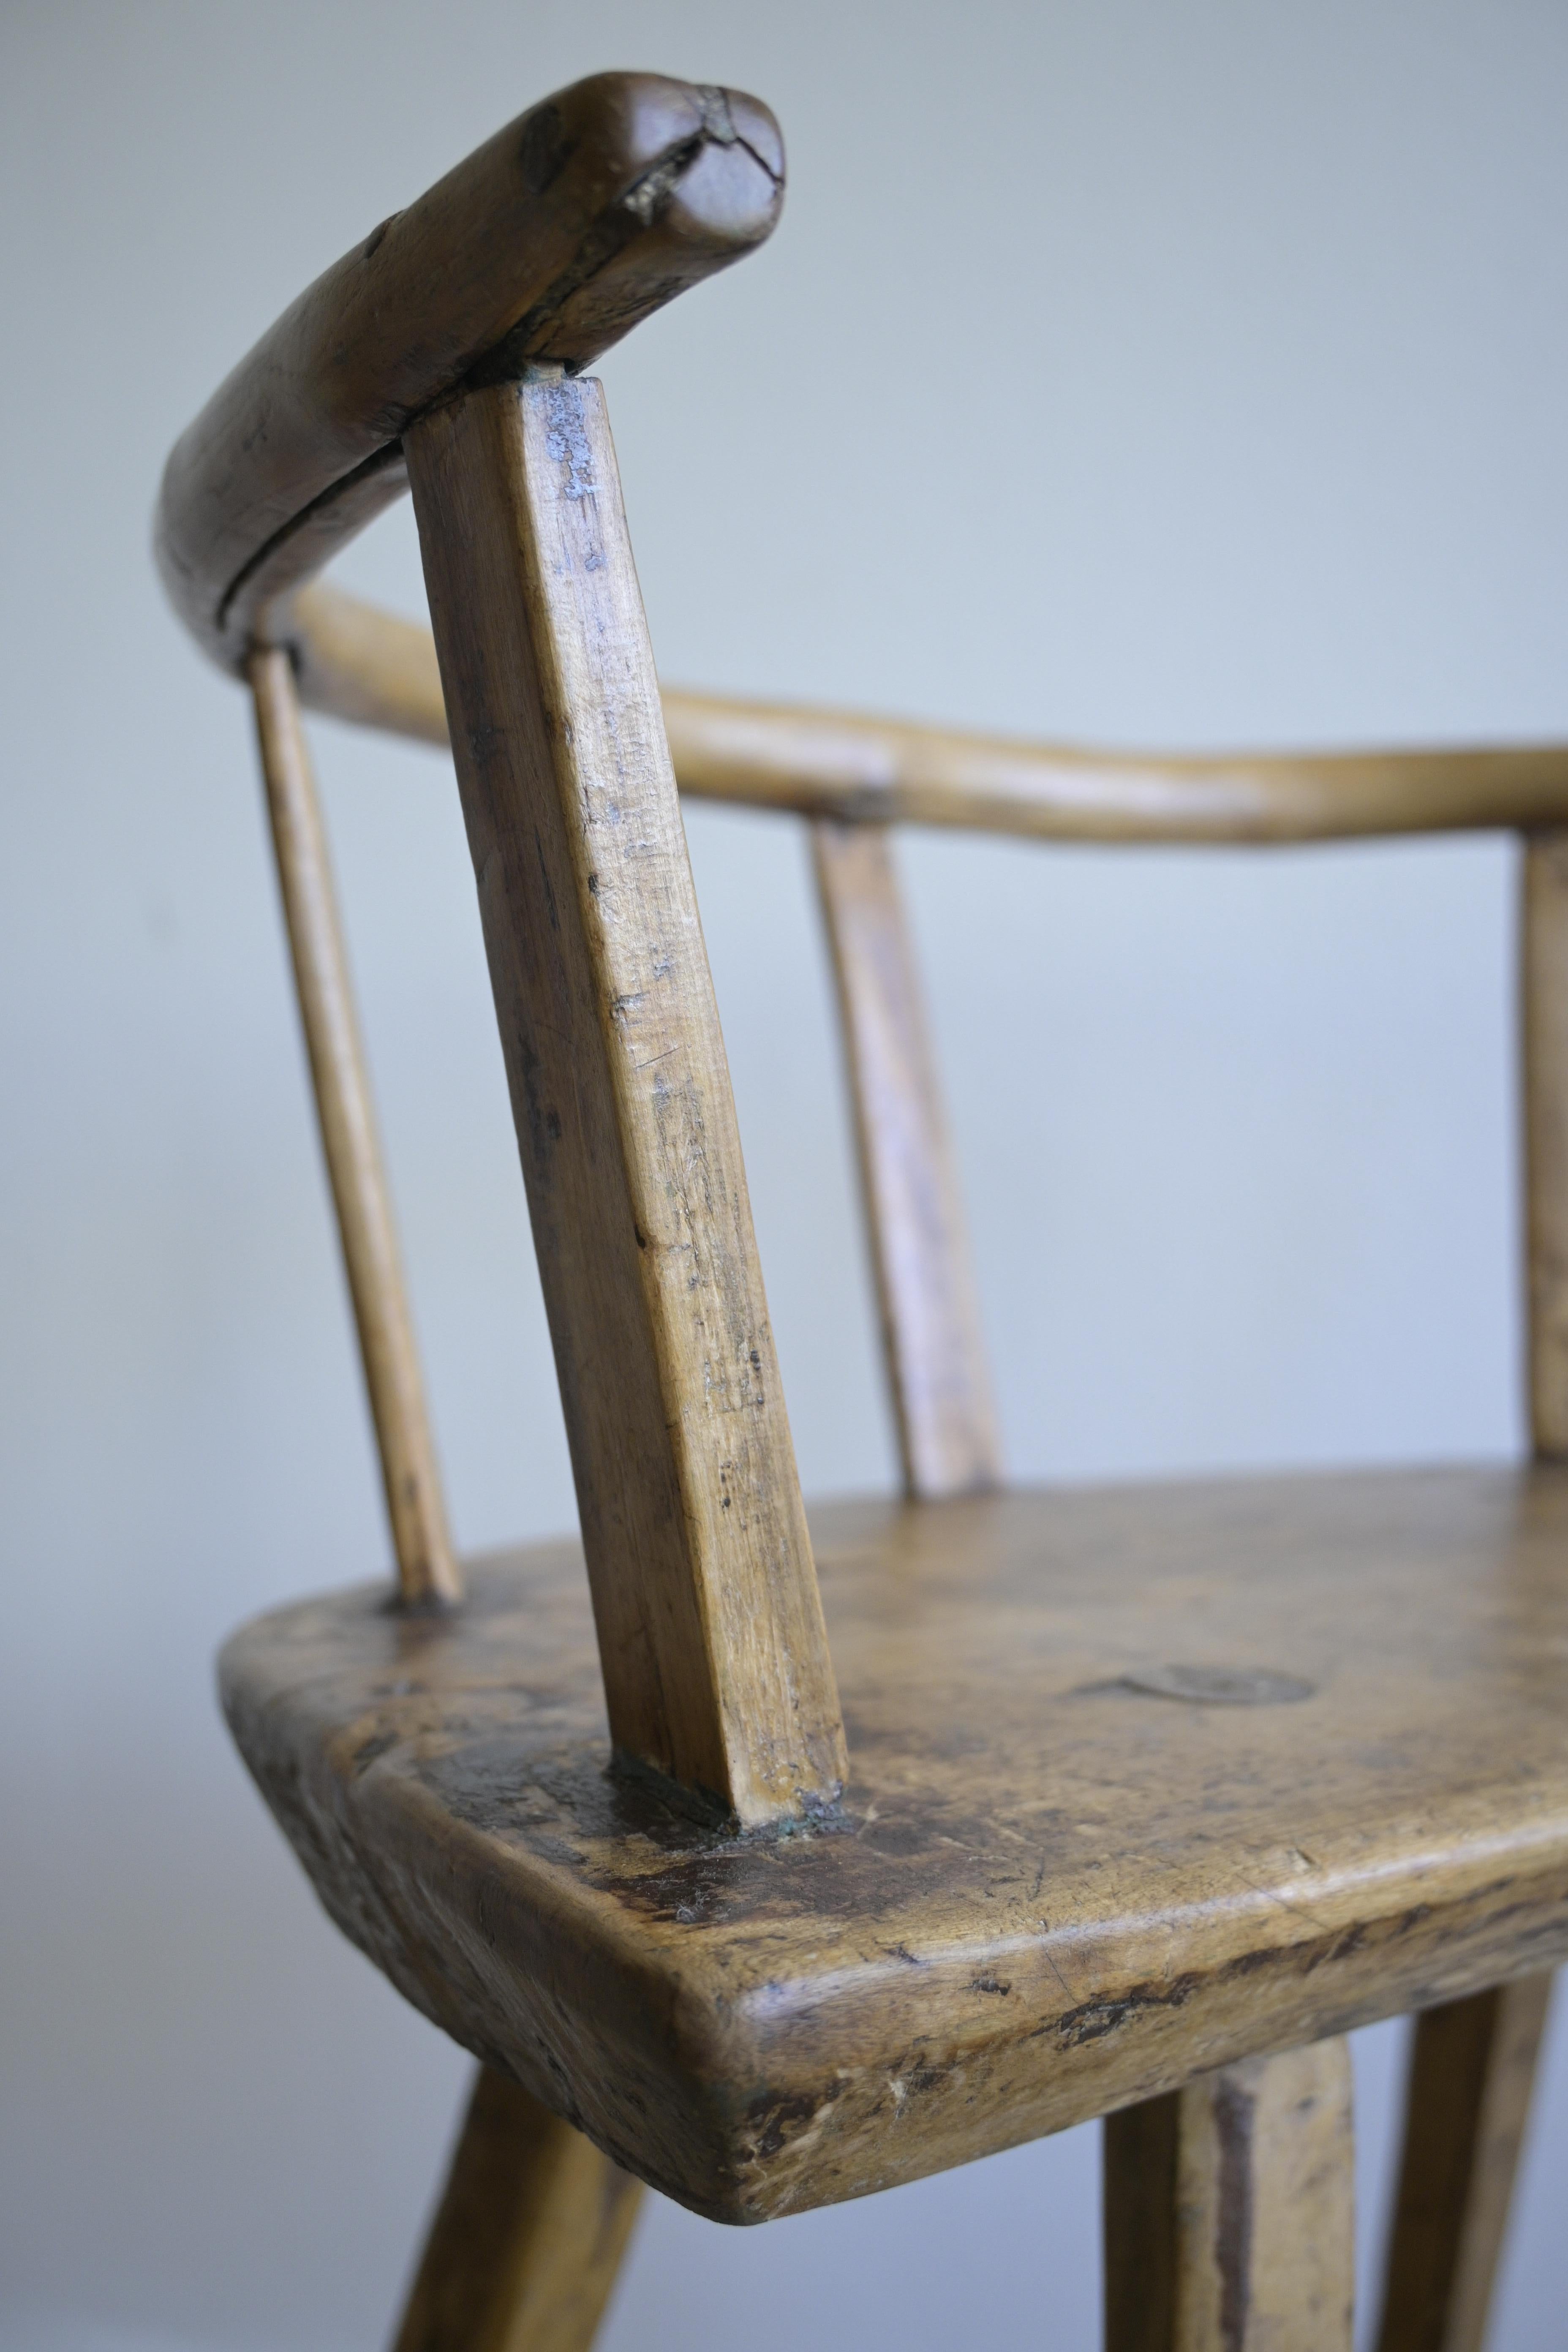 Norwegian Folk Art Chair 'Spinnastol' circa 1850

With its beautiful patina and curved lines.
Made out of birch wood.

Some traces of original paint.

Heigth: 59.5 cm/23.4 inch
Depth: 31 cm/12.2 inch
Width: 54 cm/21.2 inch
Seat Height: 42 cm/18.5